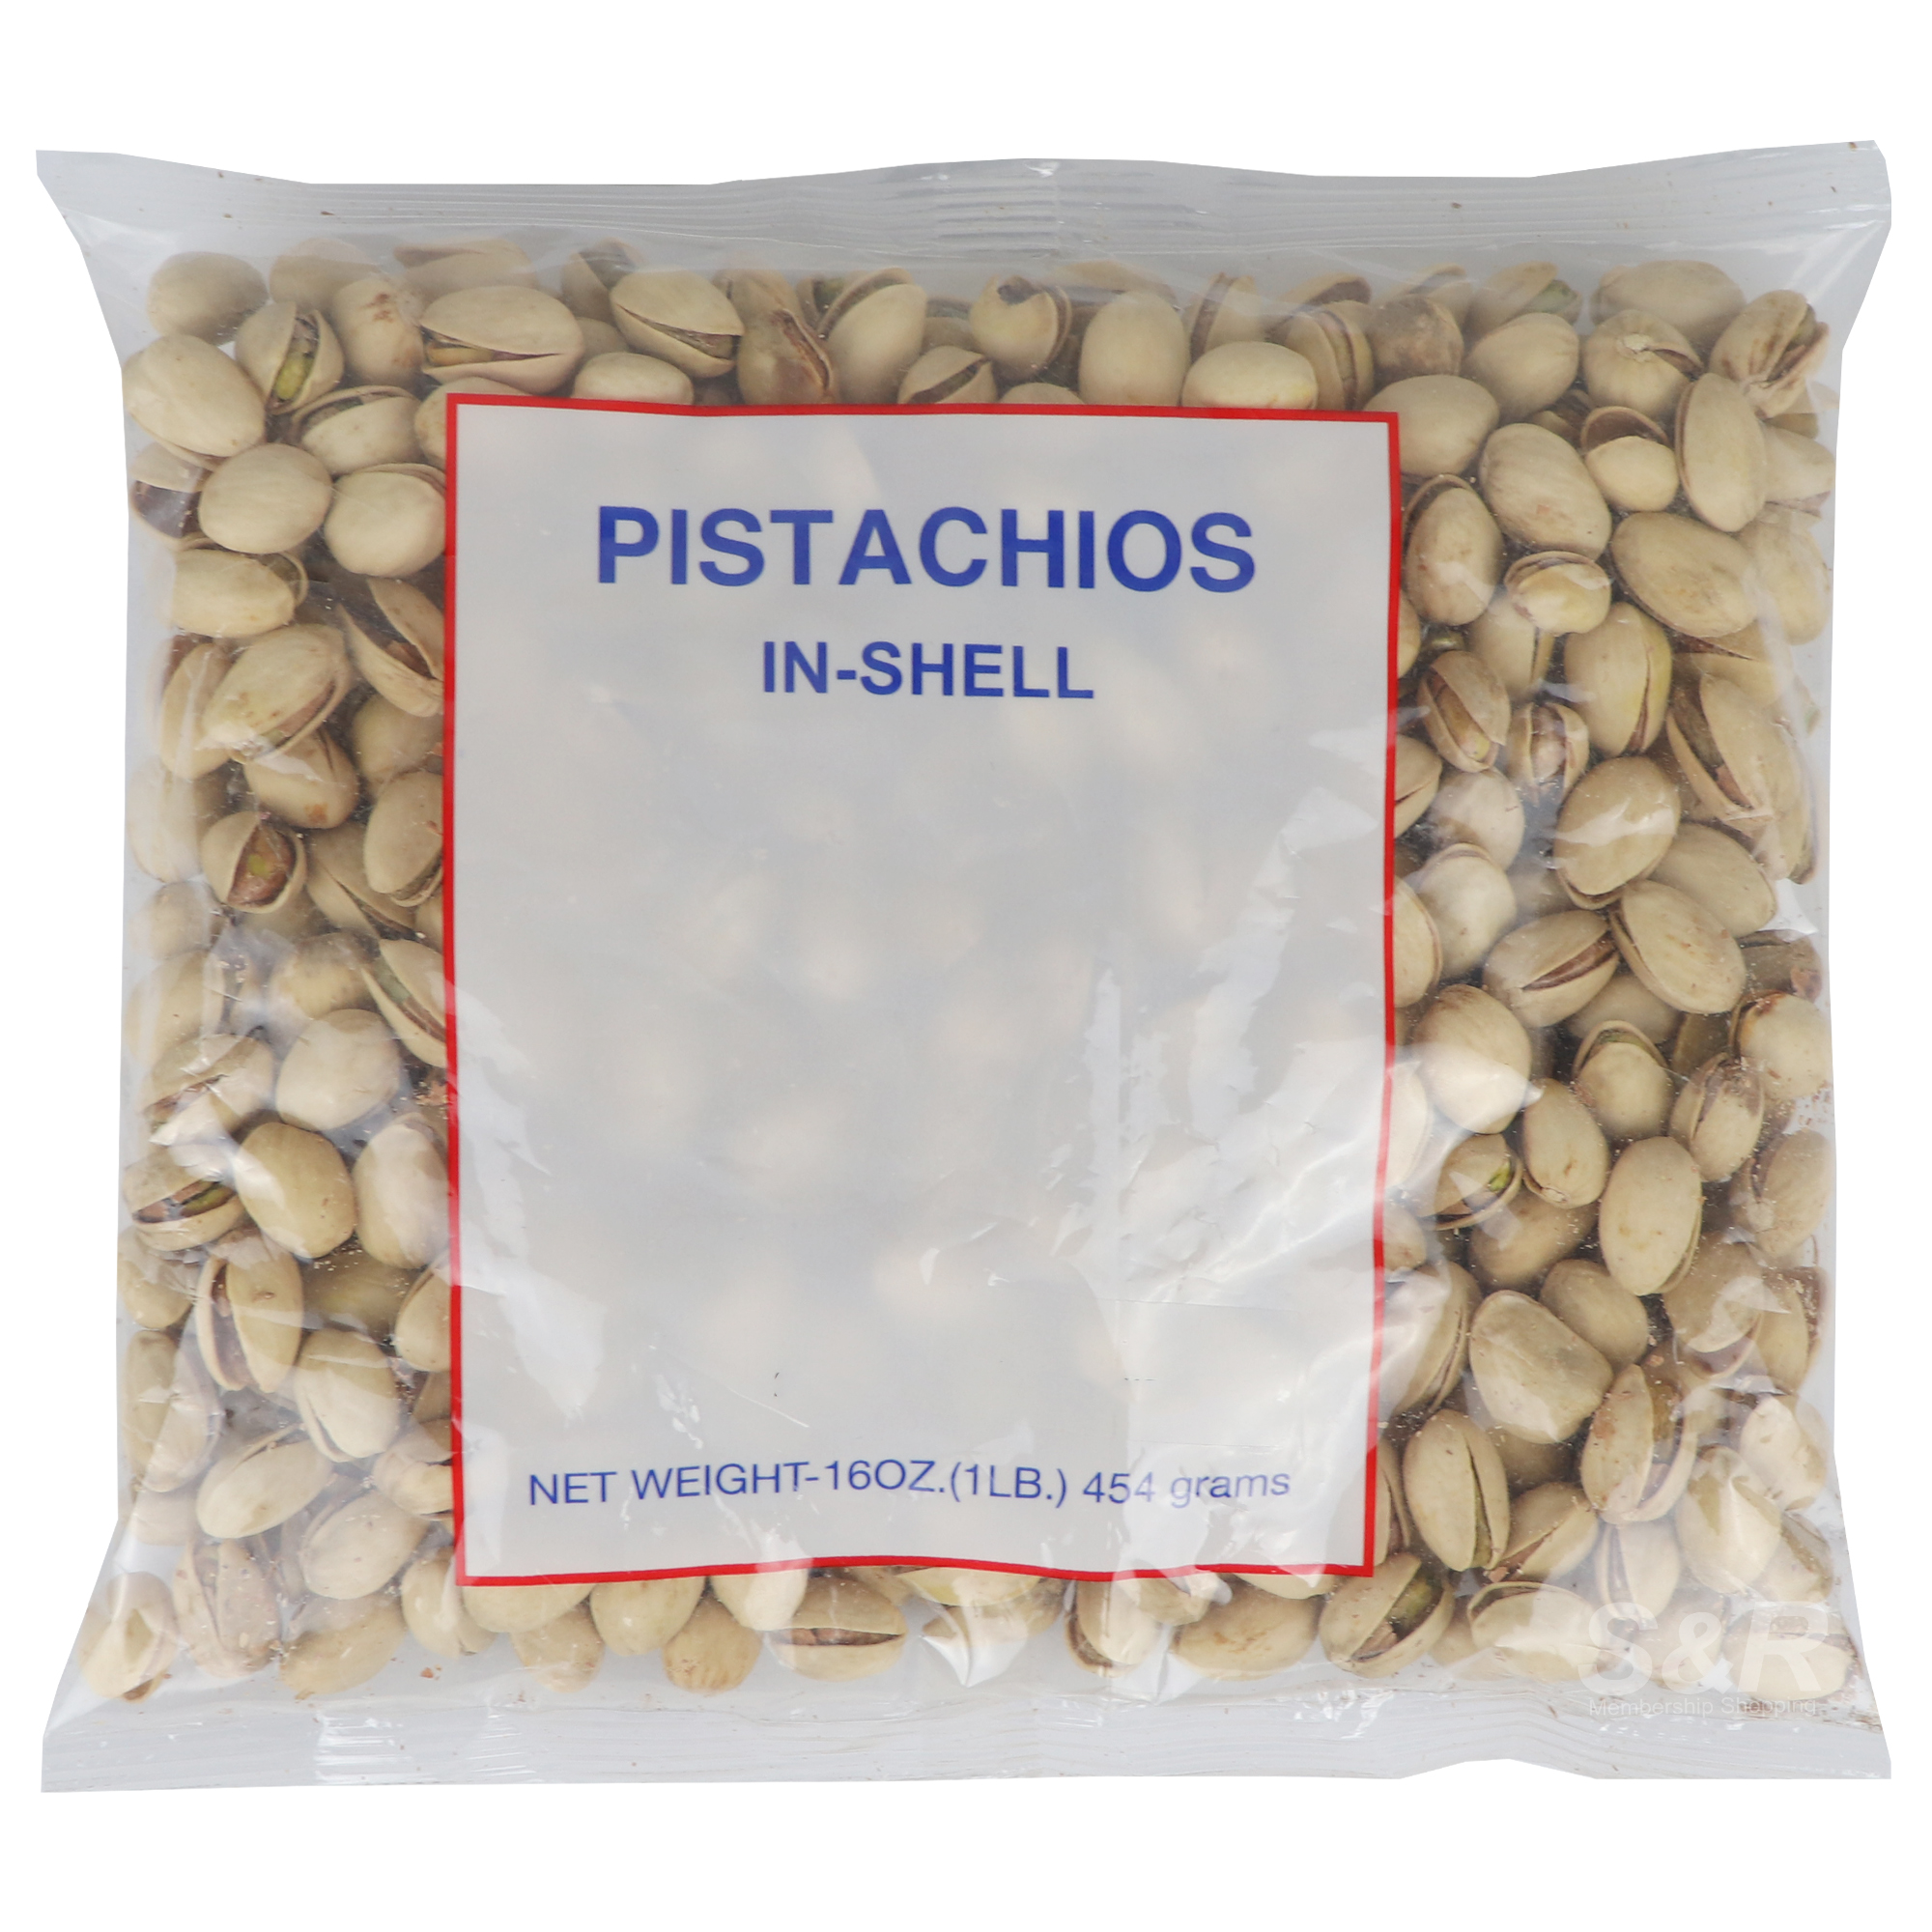 Pistachios In-Shell 454g